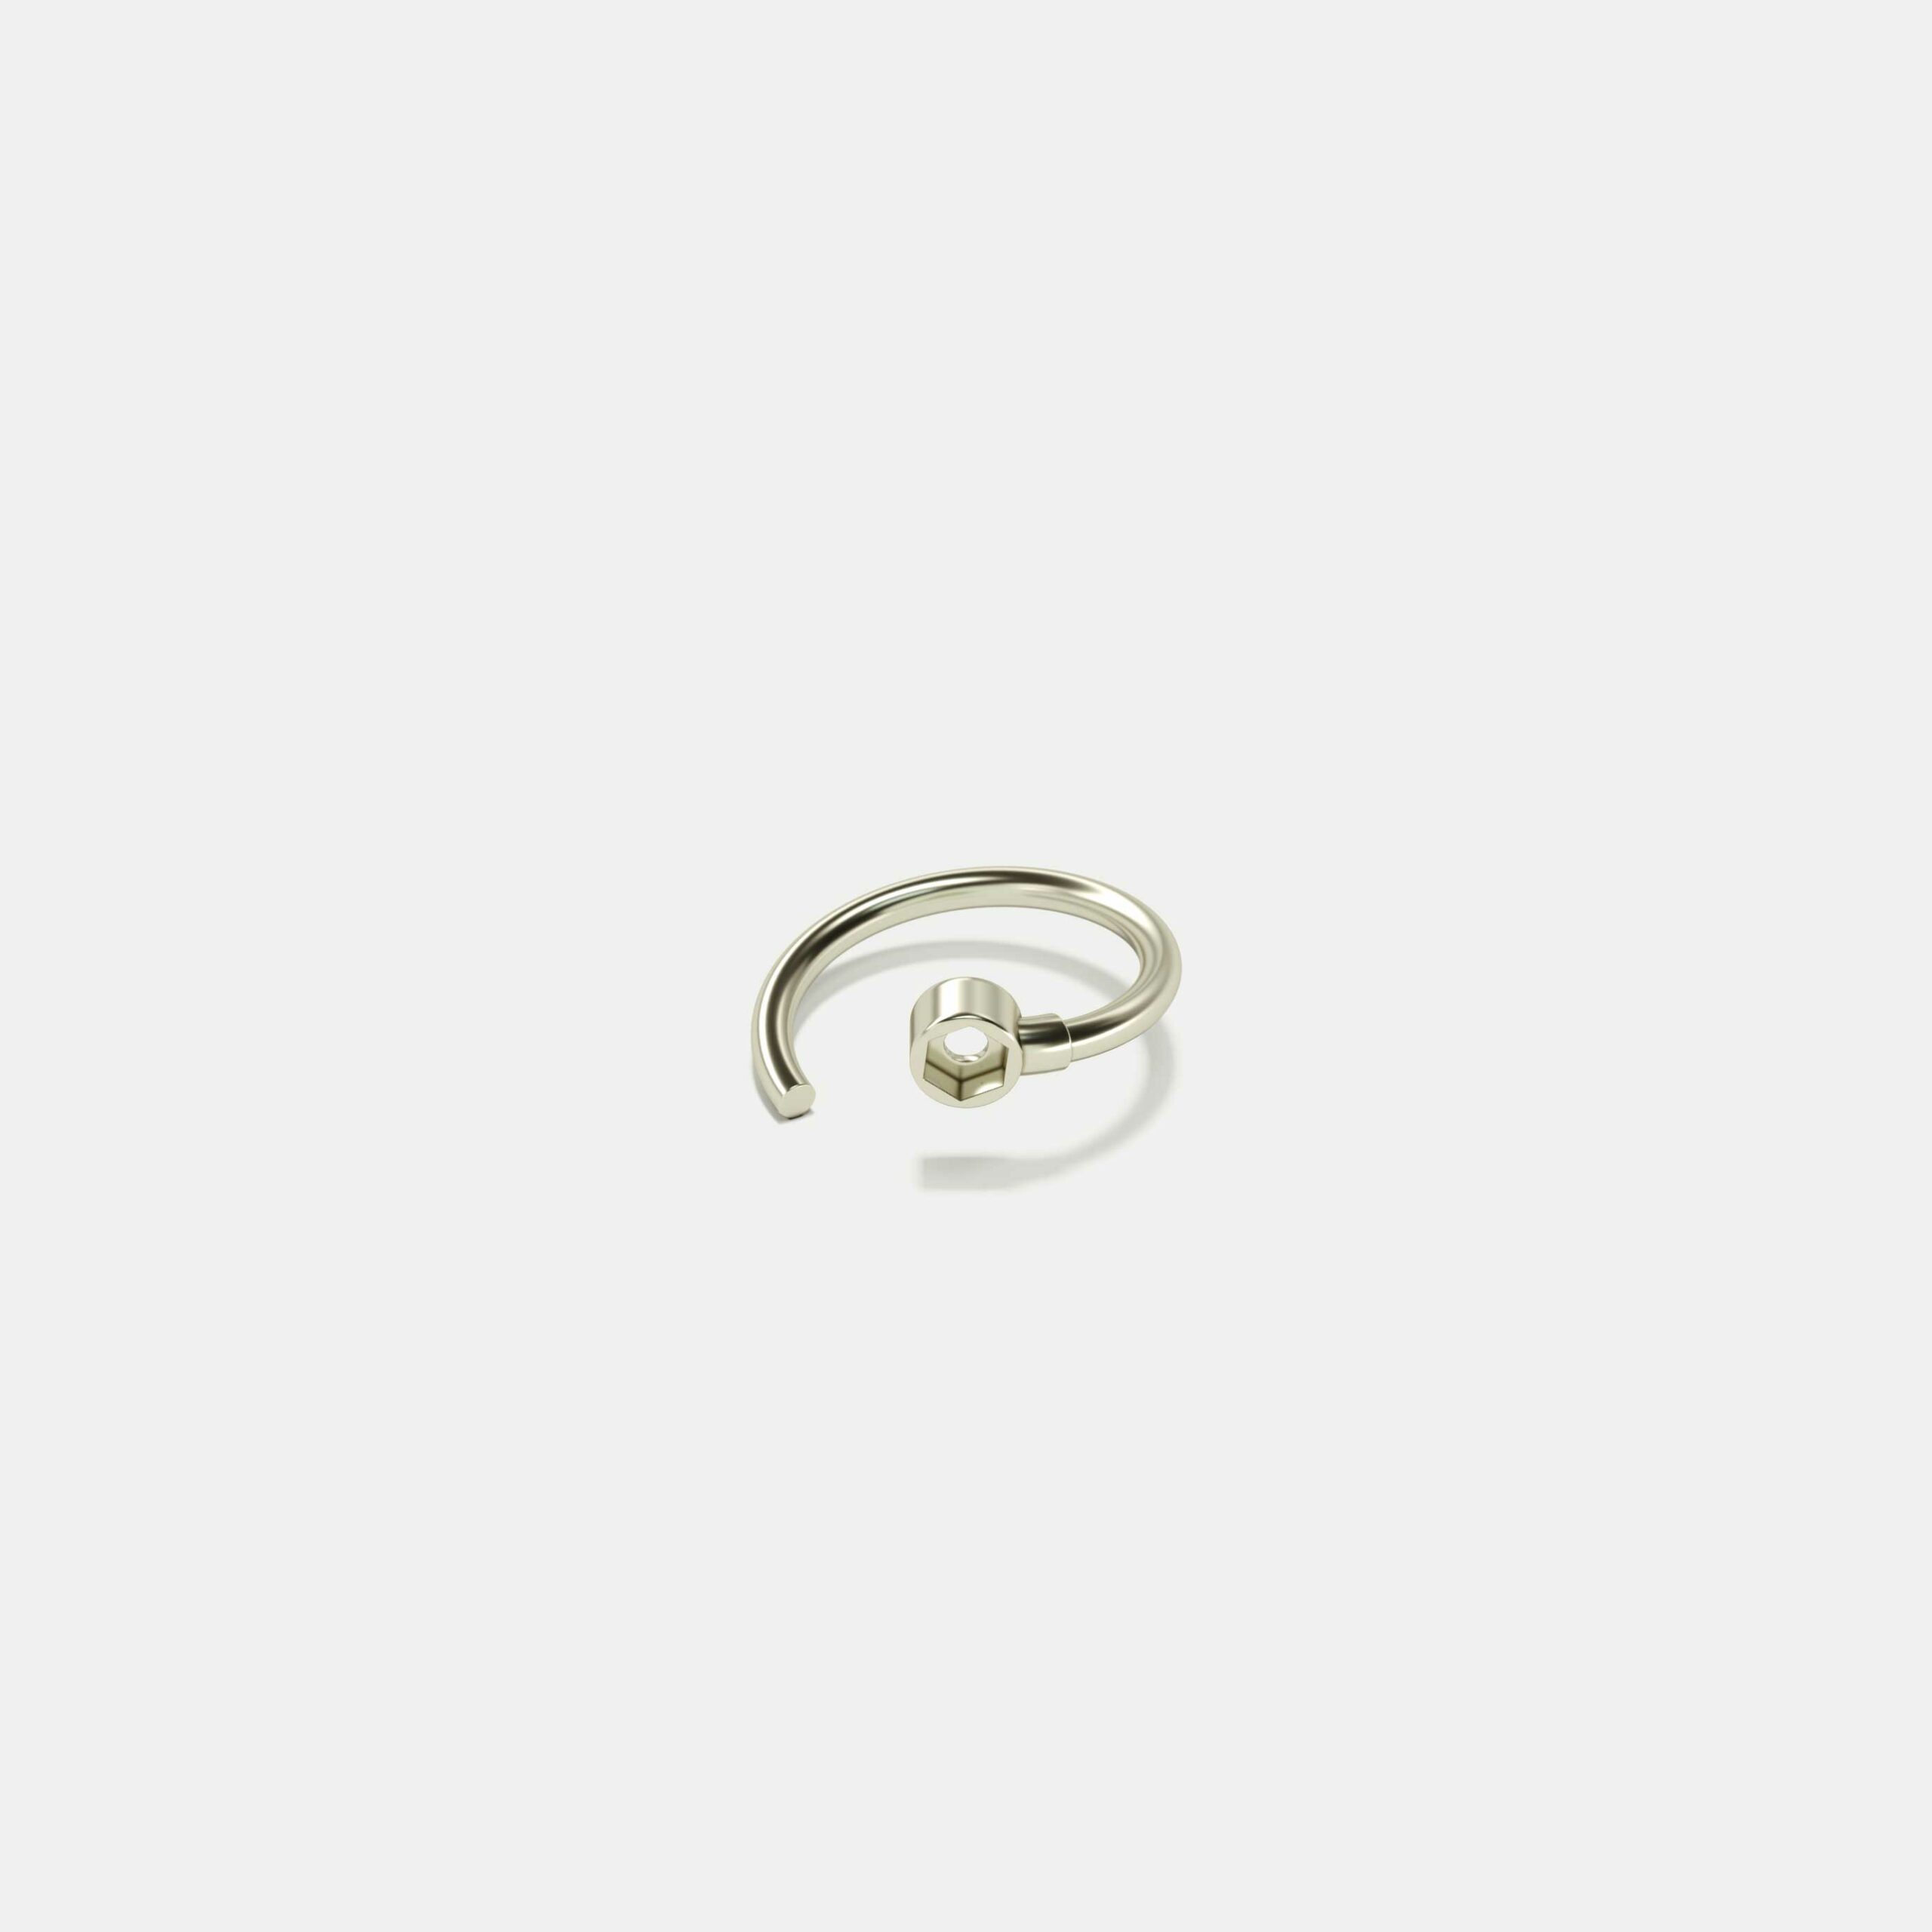 Ring № 1 in white gold